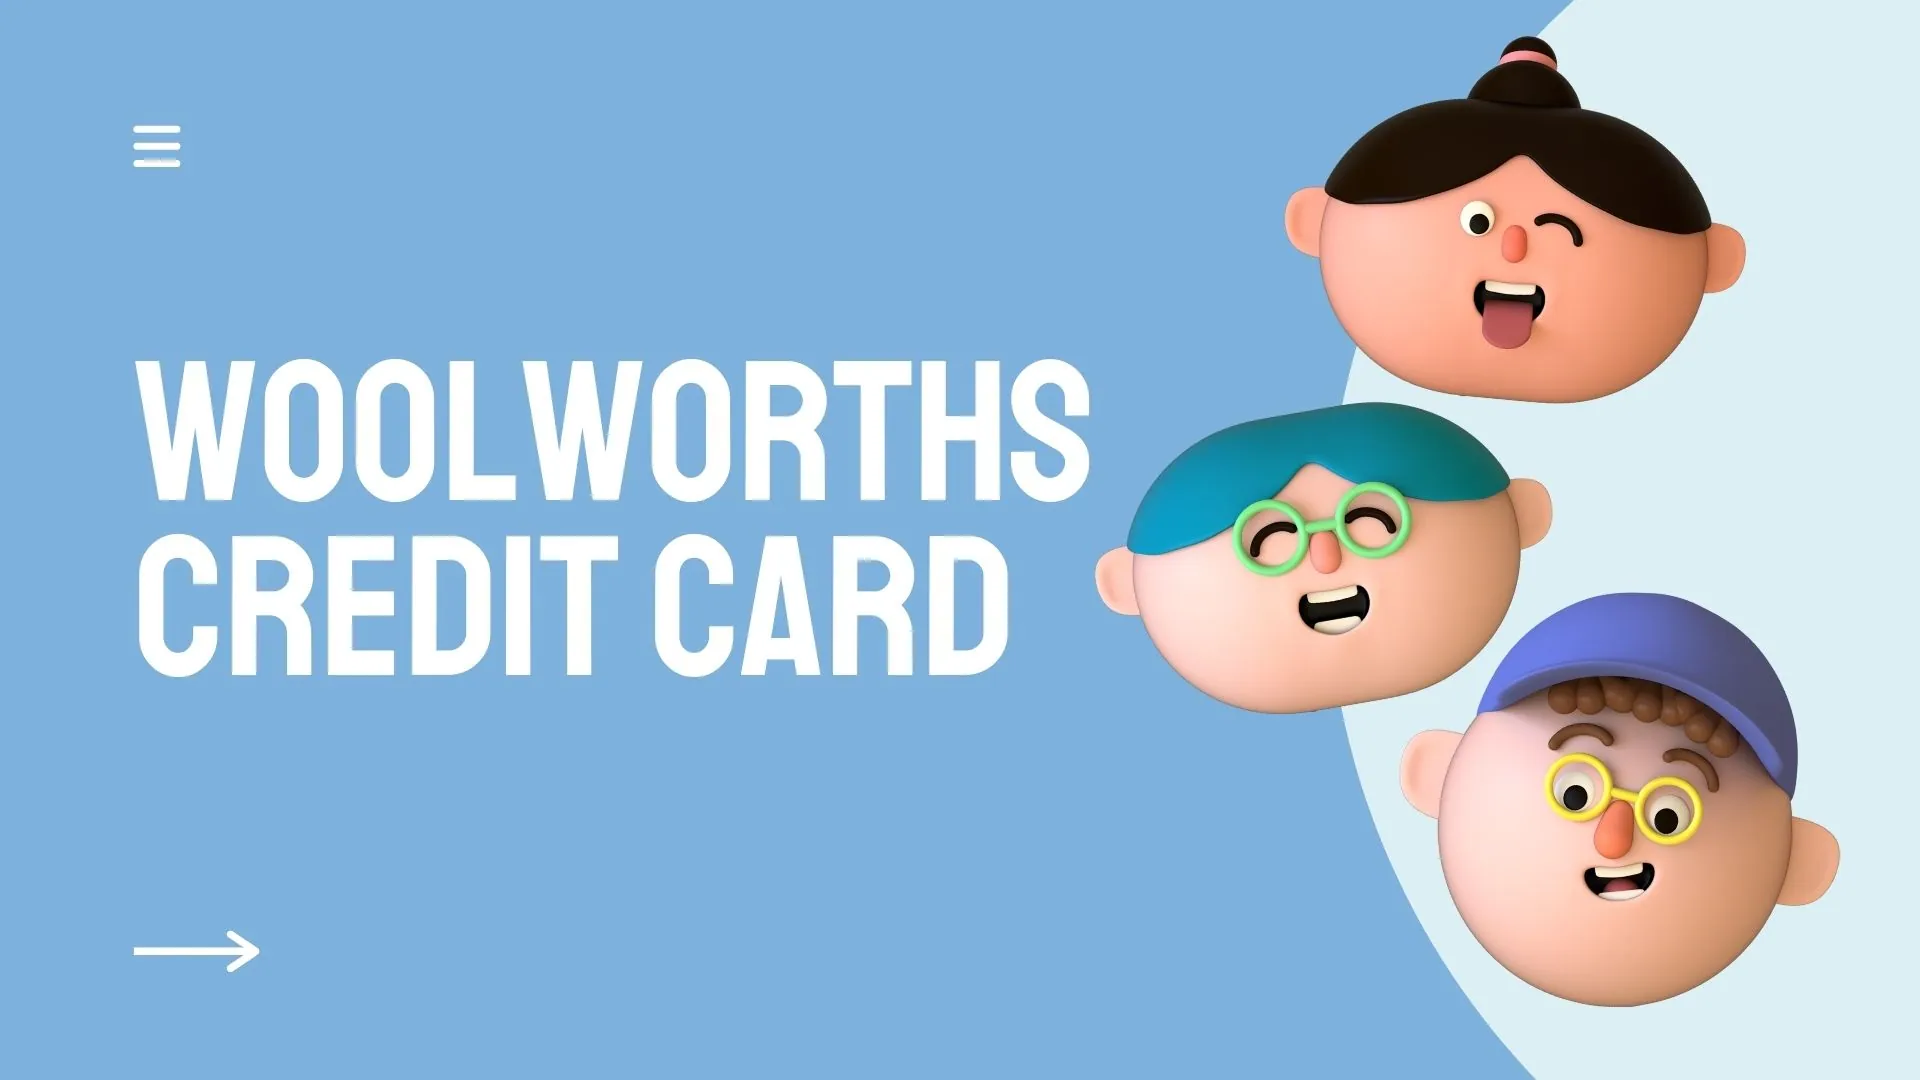 How to Transfer Money from Woolworths Credit Card?